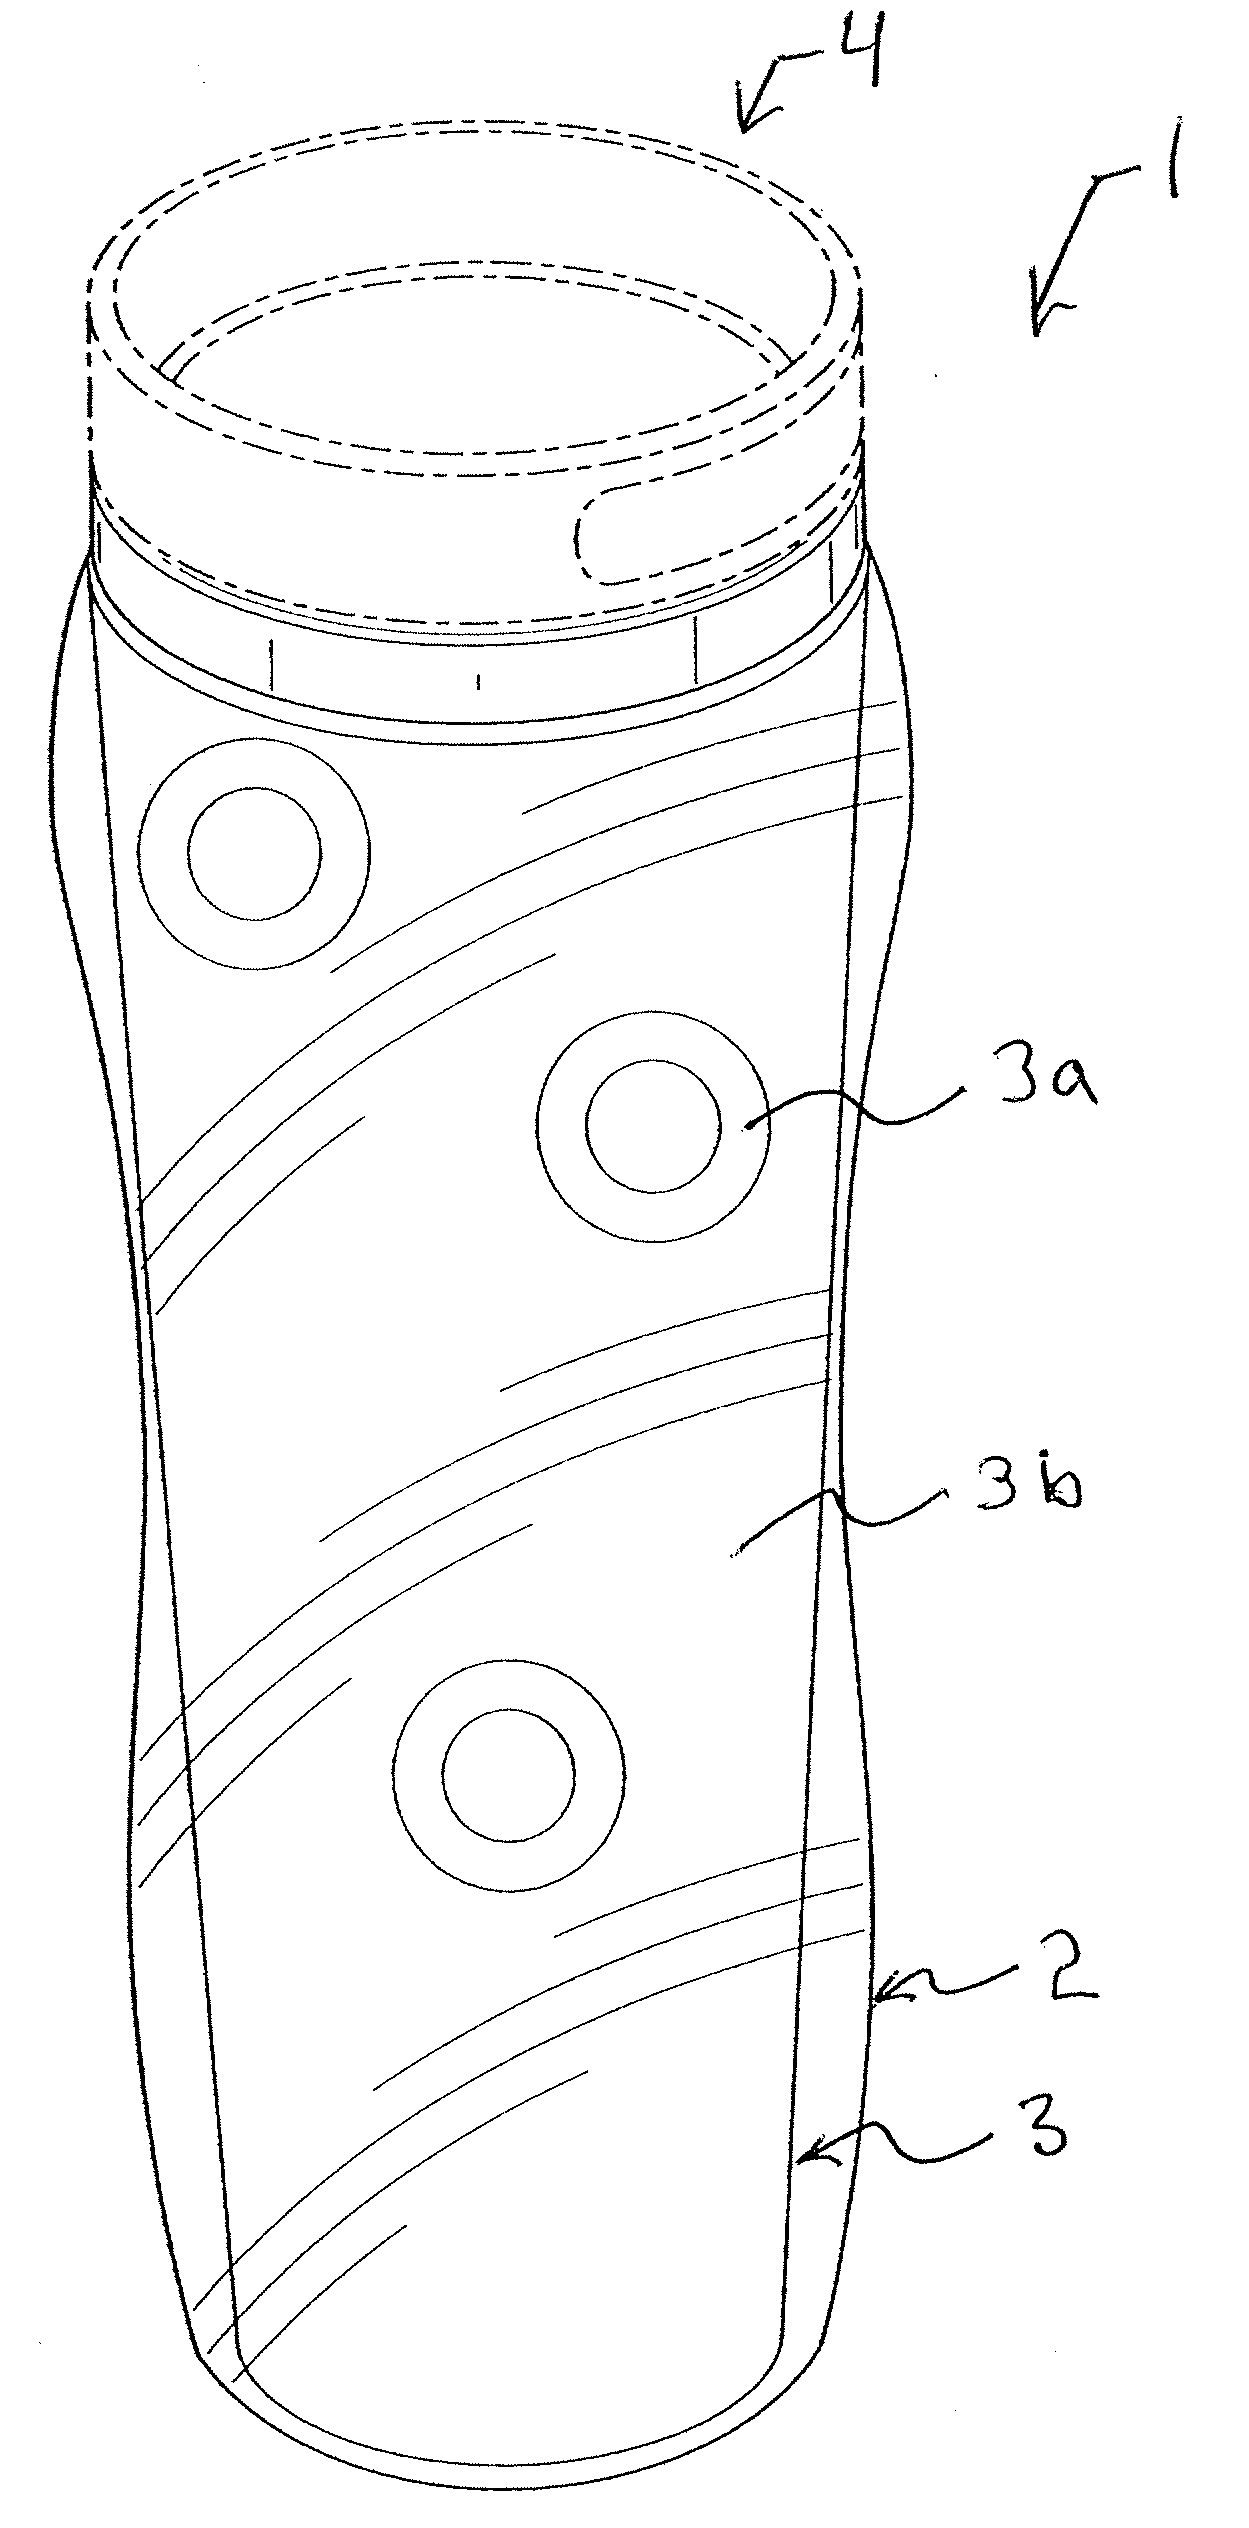 Dual- wall container with heat activated and/or temperature-change activated color changing capability